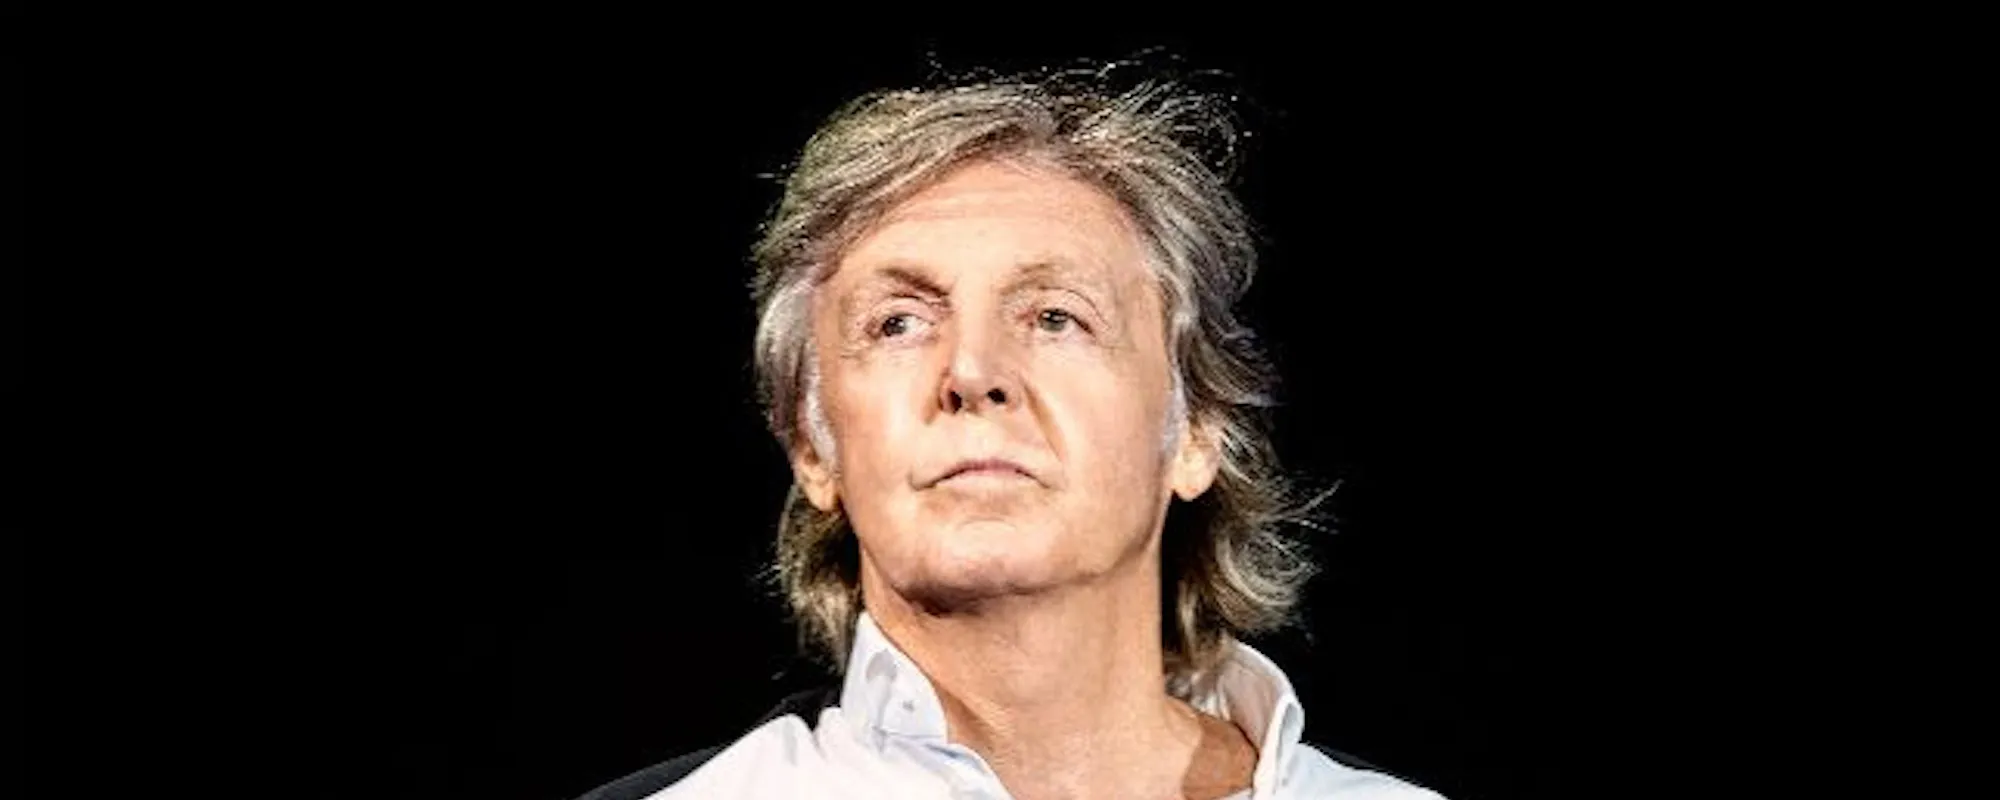 Paul McCartney at Age 80: A Look at the Legendary Singer’s Career